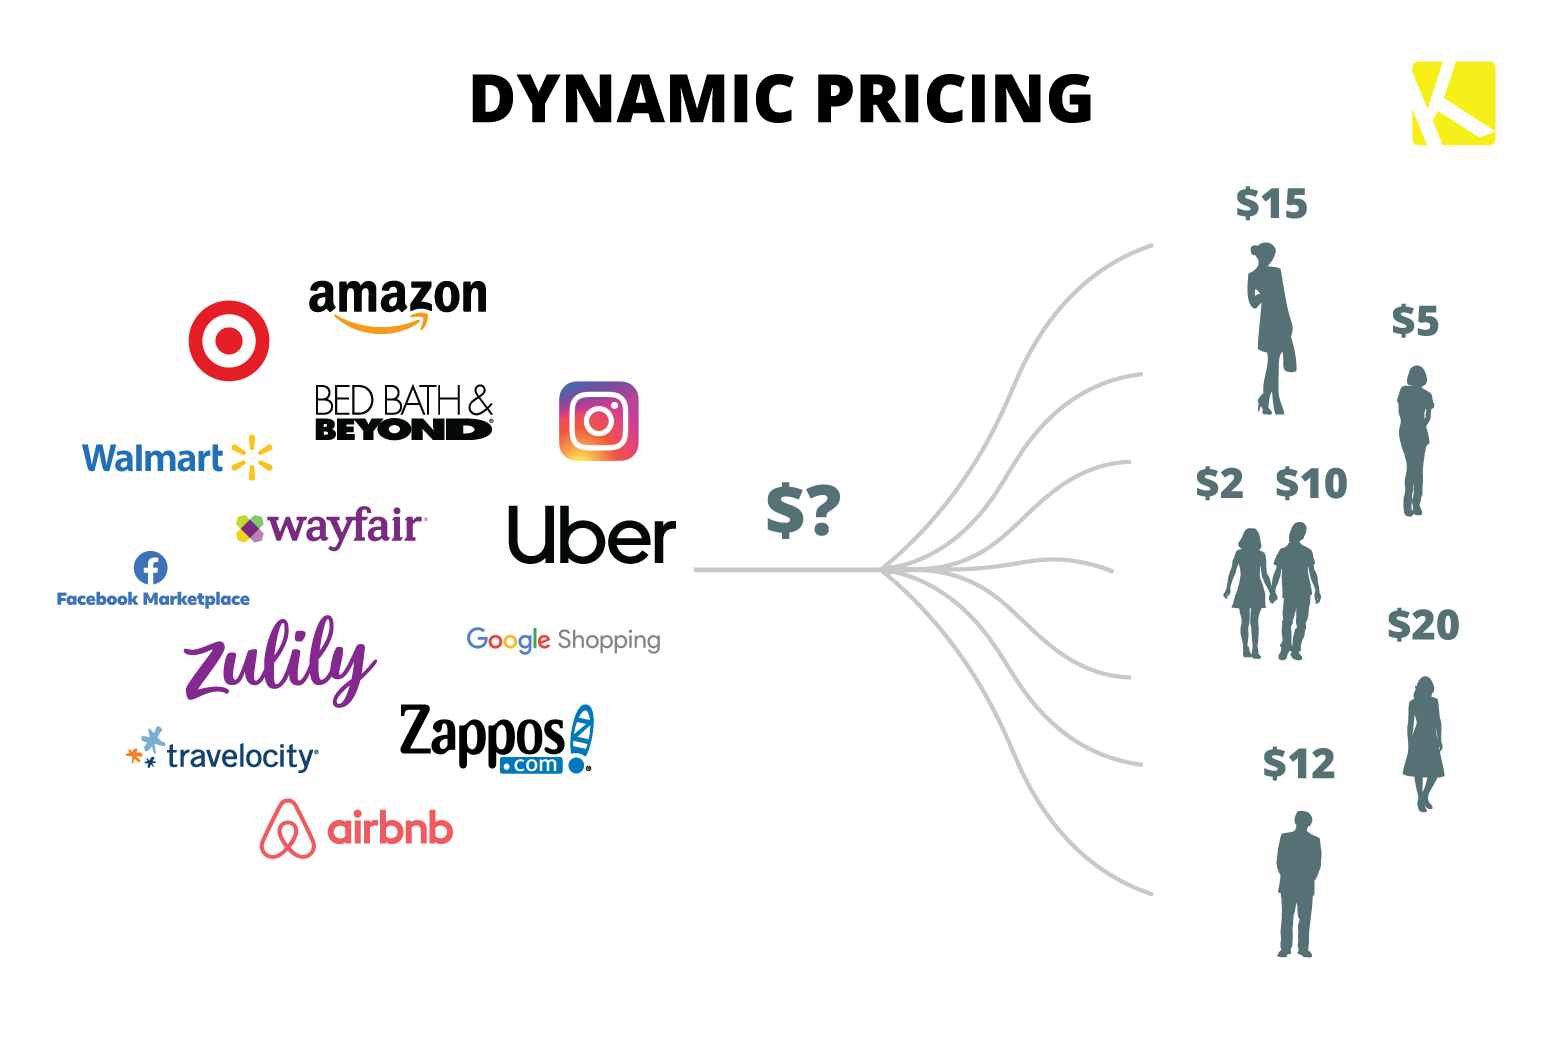 infographic showing how dynamic pricing works